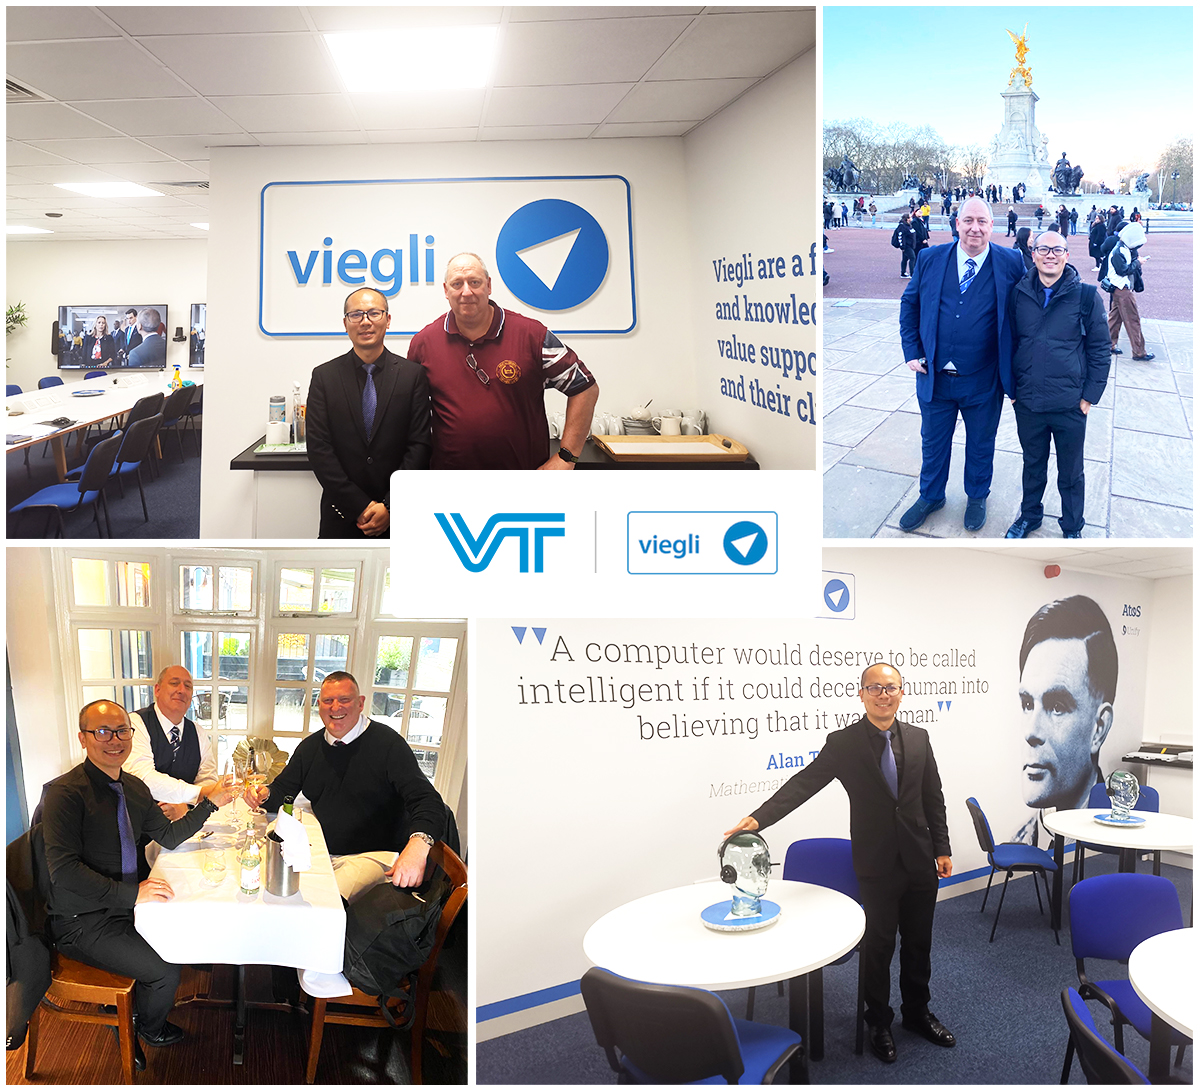 🌟 We're thrilled to share the success of Mr. Blue Wu's strategic visit to our valued partner –Viegli- in the UK! Focused on expanding 
VT headsets' market share, Mr. Wu engaged in fruitful discussions to drive strategic growth in the region.

#Viegli #VTHeadsets #Partnership